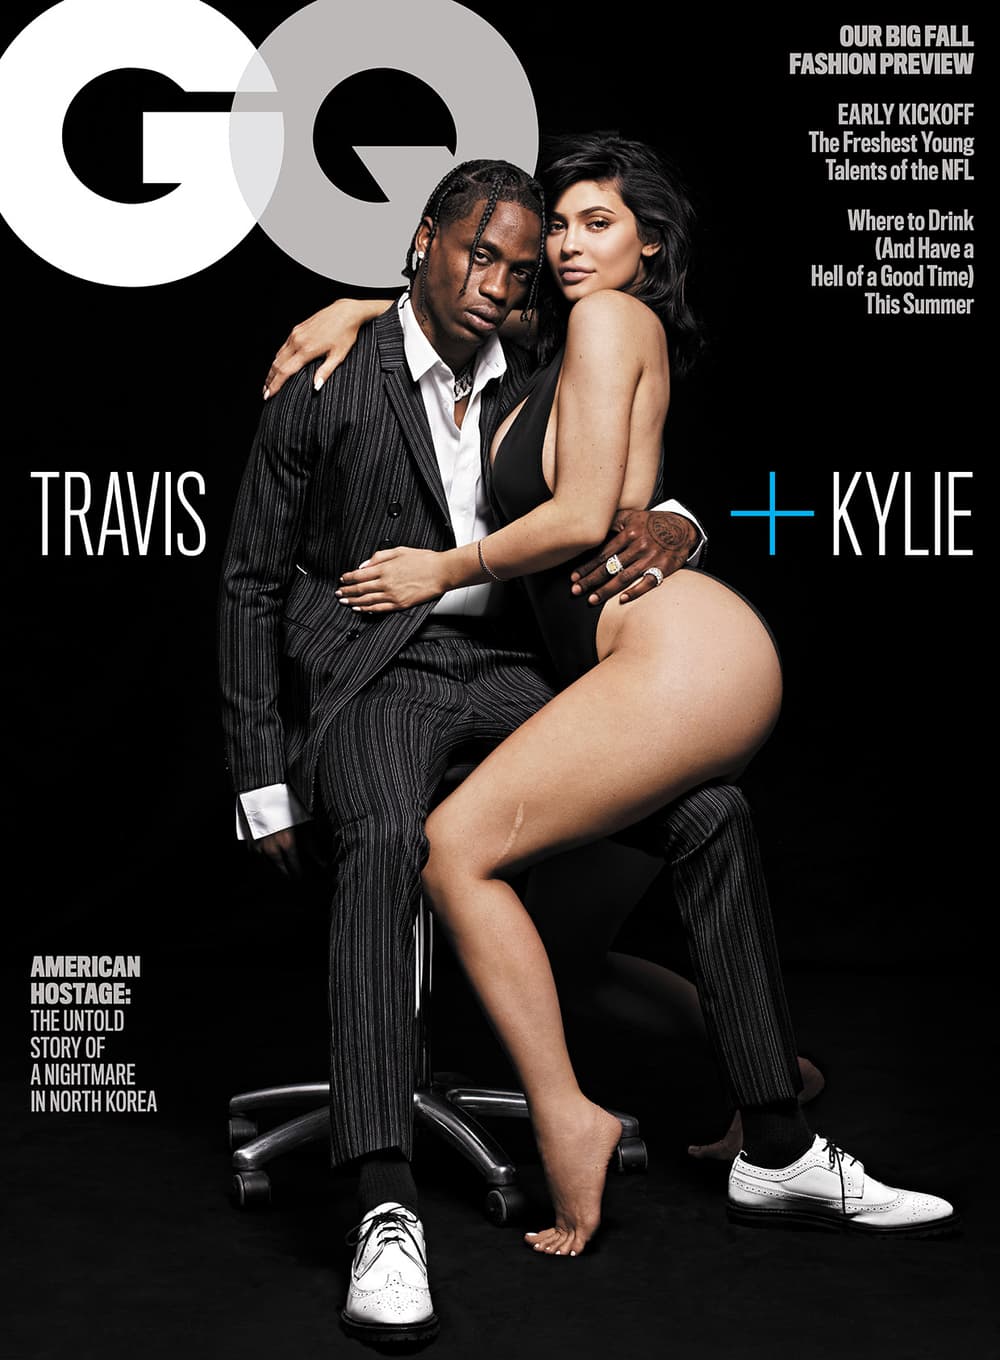 GQ Kylie Jenner Travis Scott 2018 August Issue Purchase Buy Cop Available Soon Music Fall Fashion Stormi Cover Story Kardashian